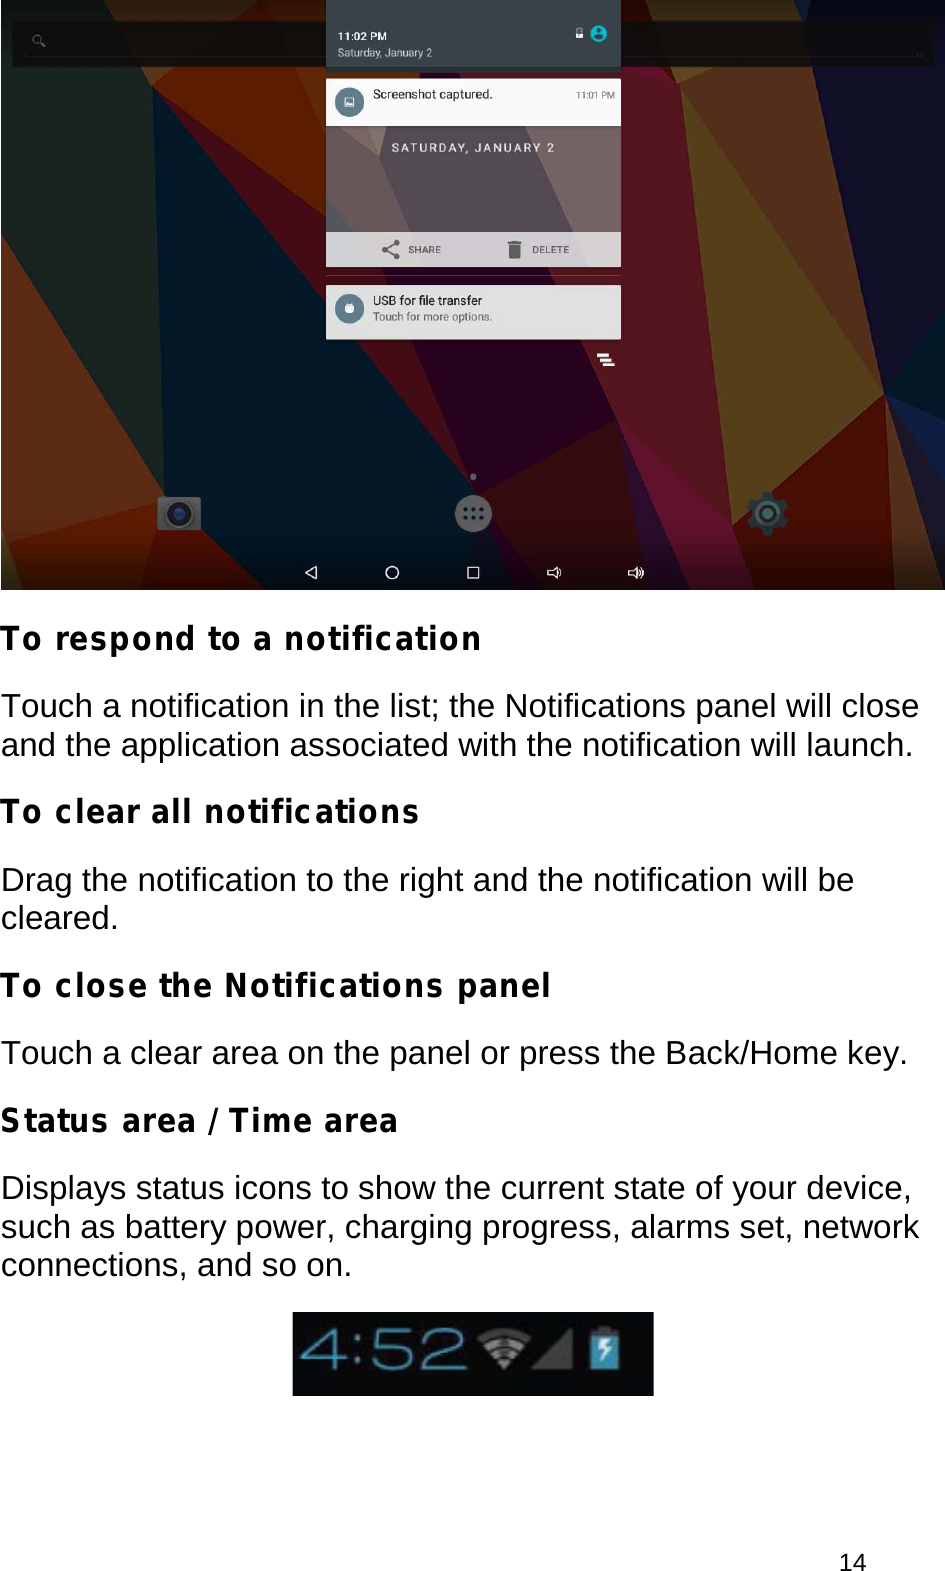  14  To respond to a notification Touch a notification in the list; the Notifications panel will close and the application associated with the notification will launch. To clear all notifications Drag the notification to the right and the notification will be cleared. To close the Notifications panel Touch a clear area on the panel or press the Back/Home key. Status area / Time area Displays status icons to show the current state of your device, such as battery power, charging progress, alarms set, network connections, and so on.  